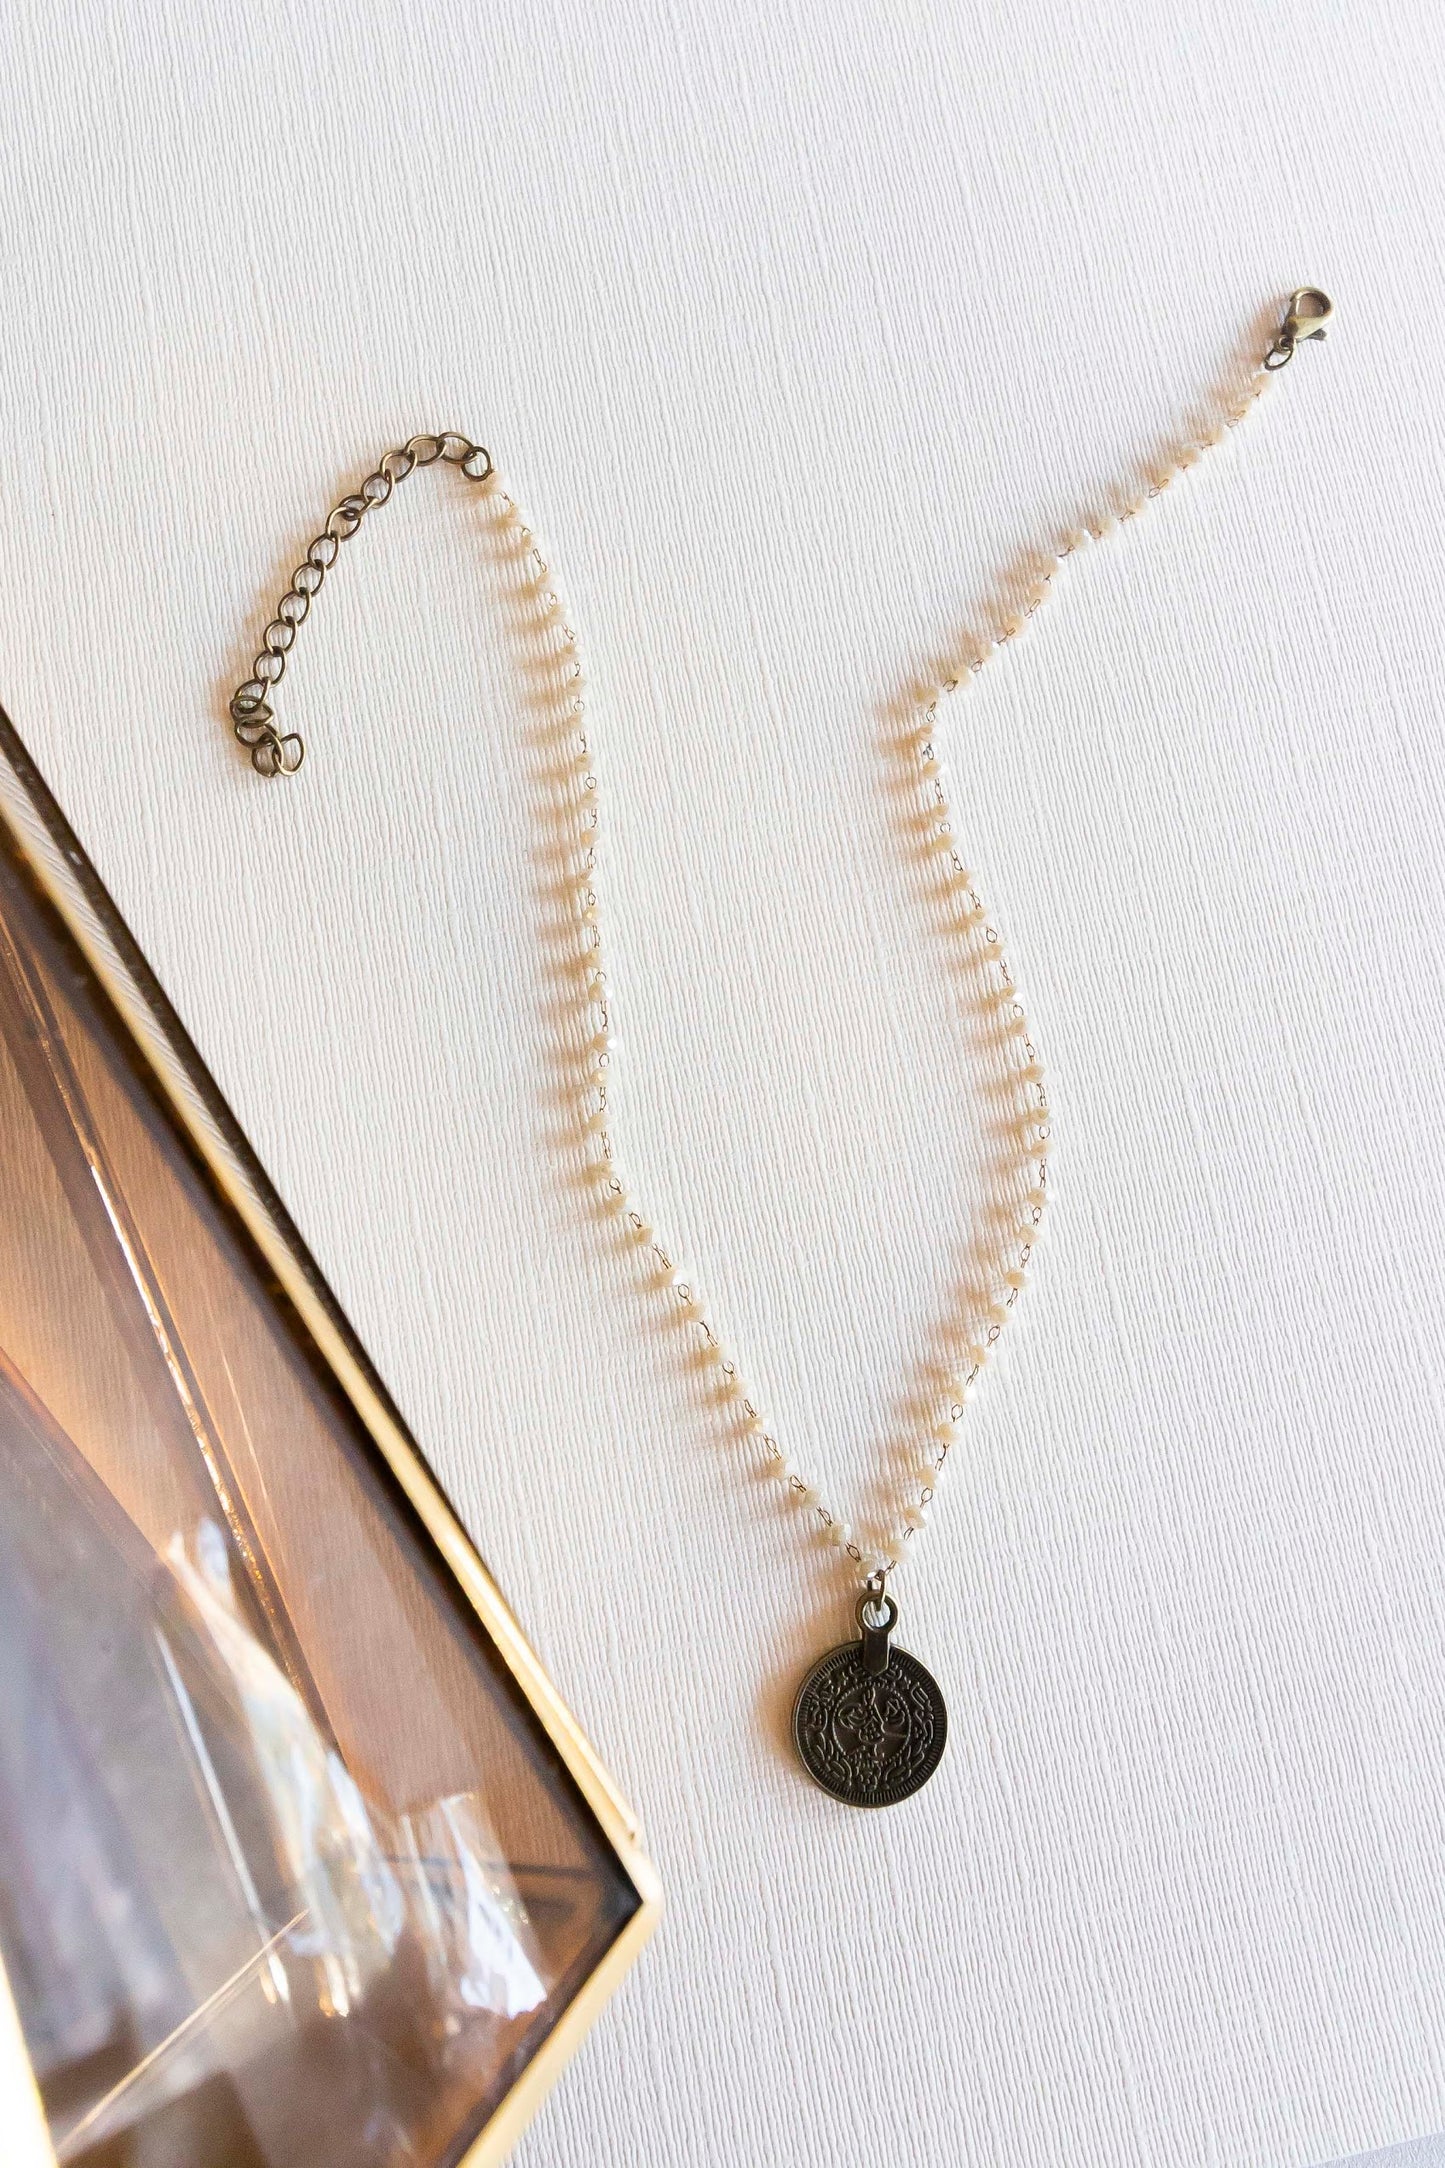 Load image into Gallery viewer, Jane Bronze Pendant Necklace | Dainty Renaissance Short Necklace | Cream Beads and Burnished Bronze Coin Pendant | Victorian Ancient Coin Charm
